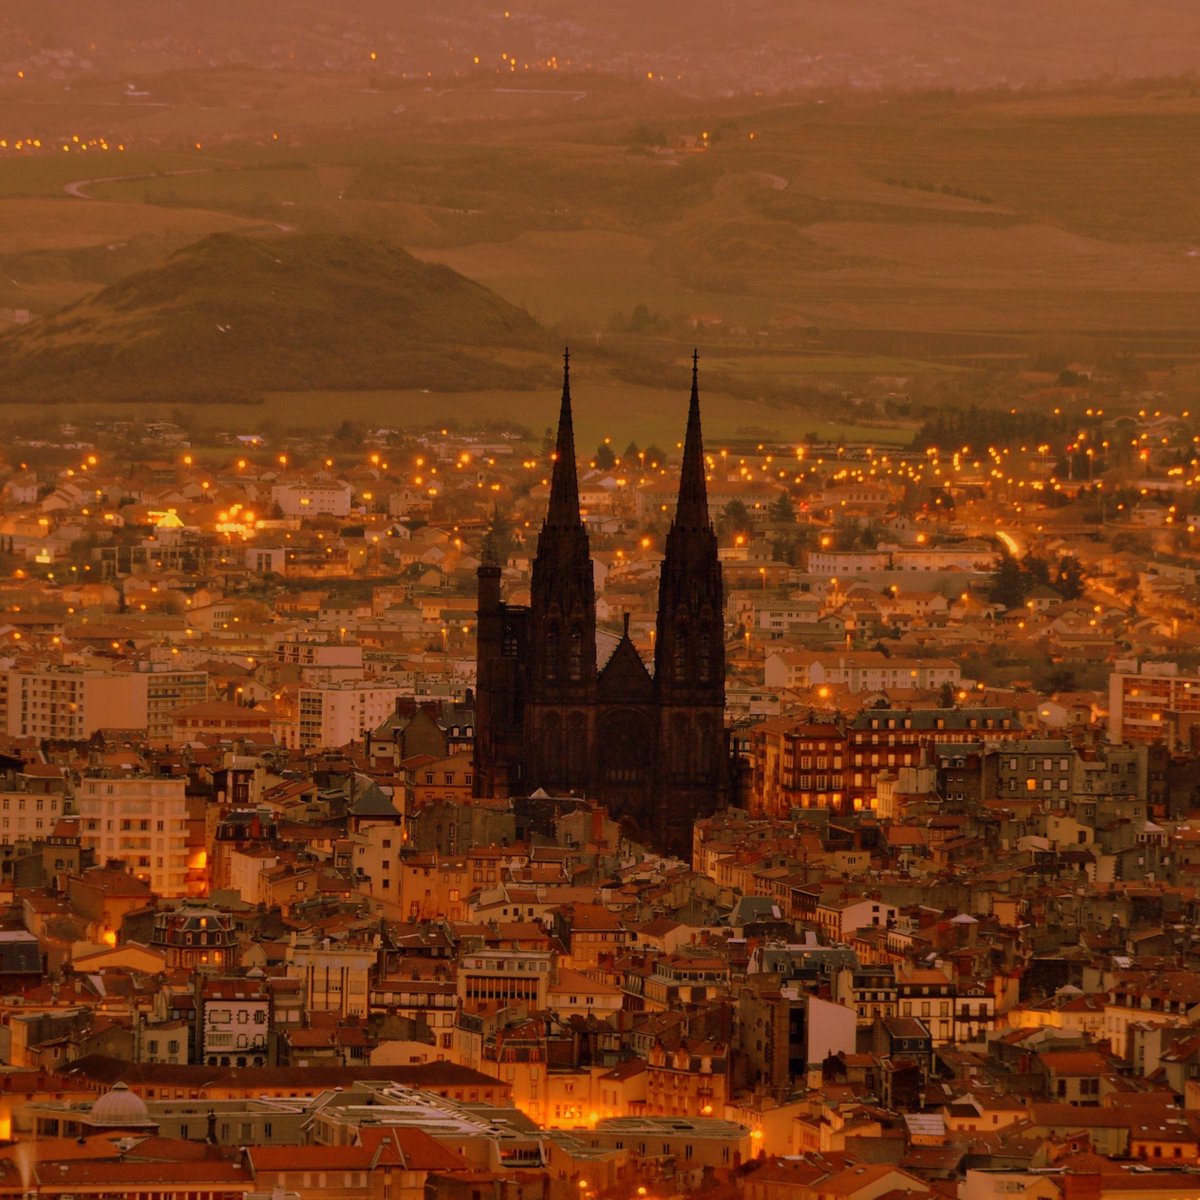 10. Clermont-Ferrand Cathedral, France (13th - 19th century) An imposing Gothic masterpiece built entirely from black lava stone. The 315-foot twin spires dominate the city's skyline, making for a striking view for miles upon miles.